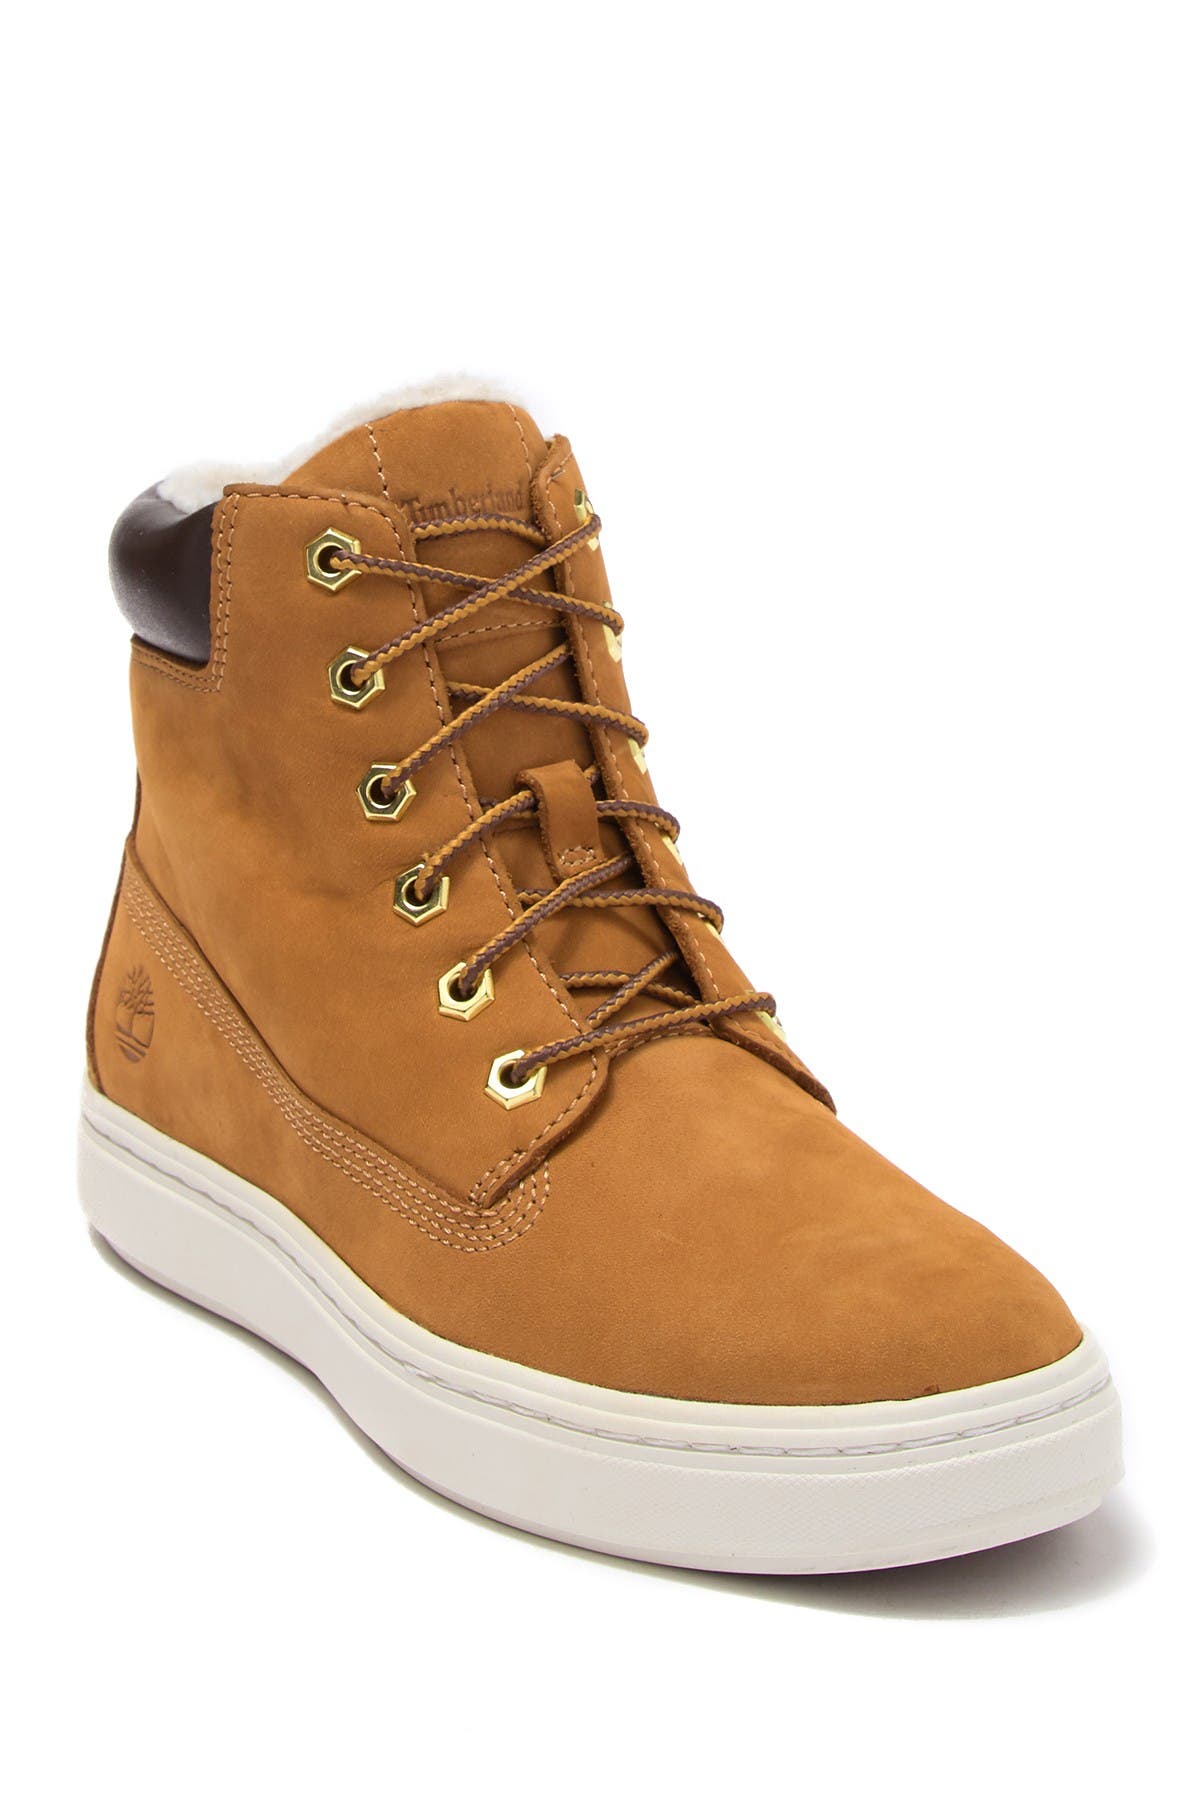 high top timberland sneakers